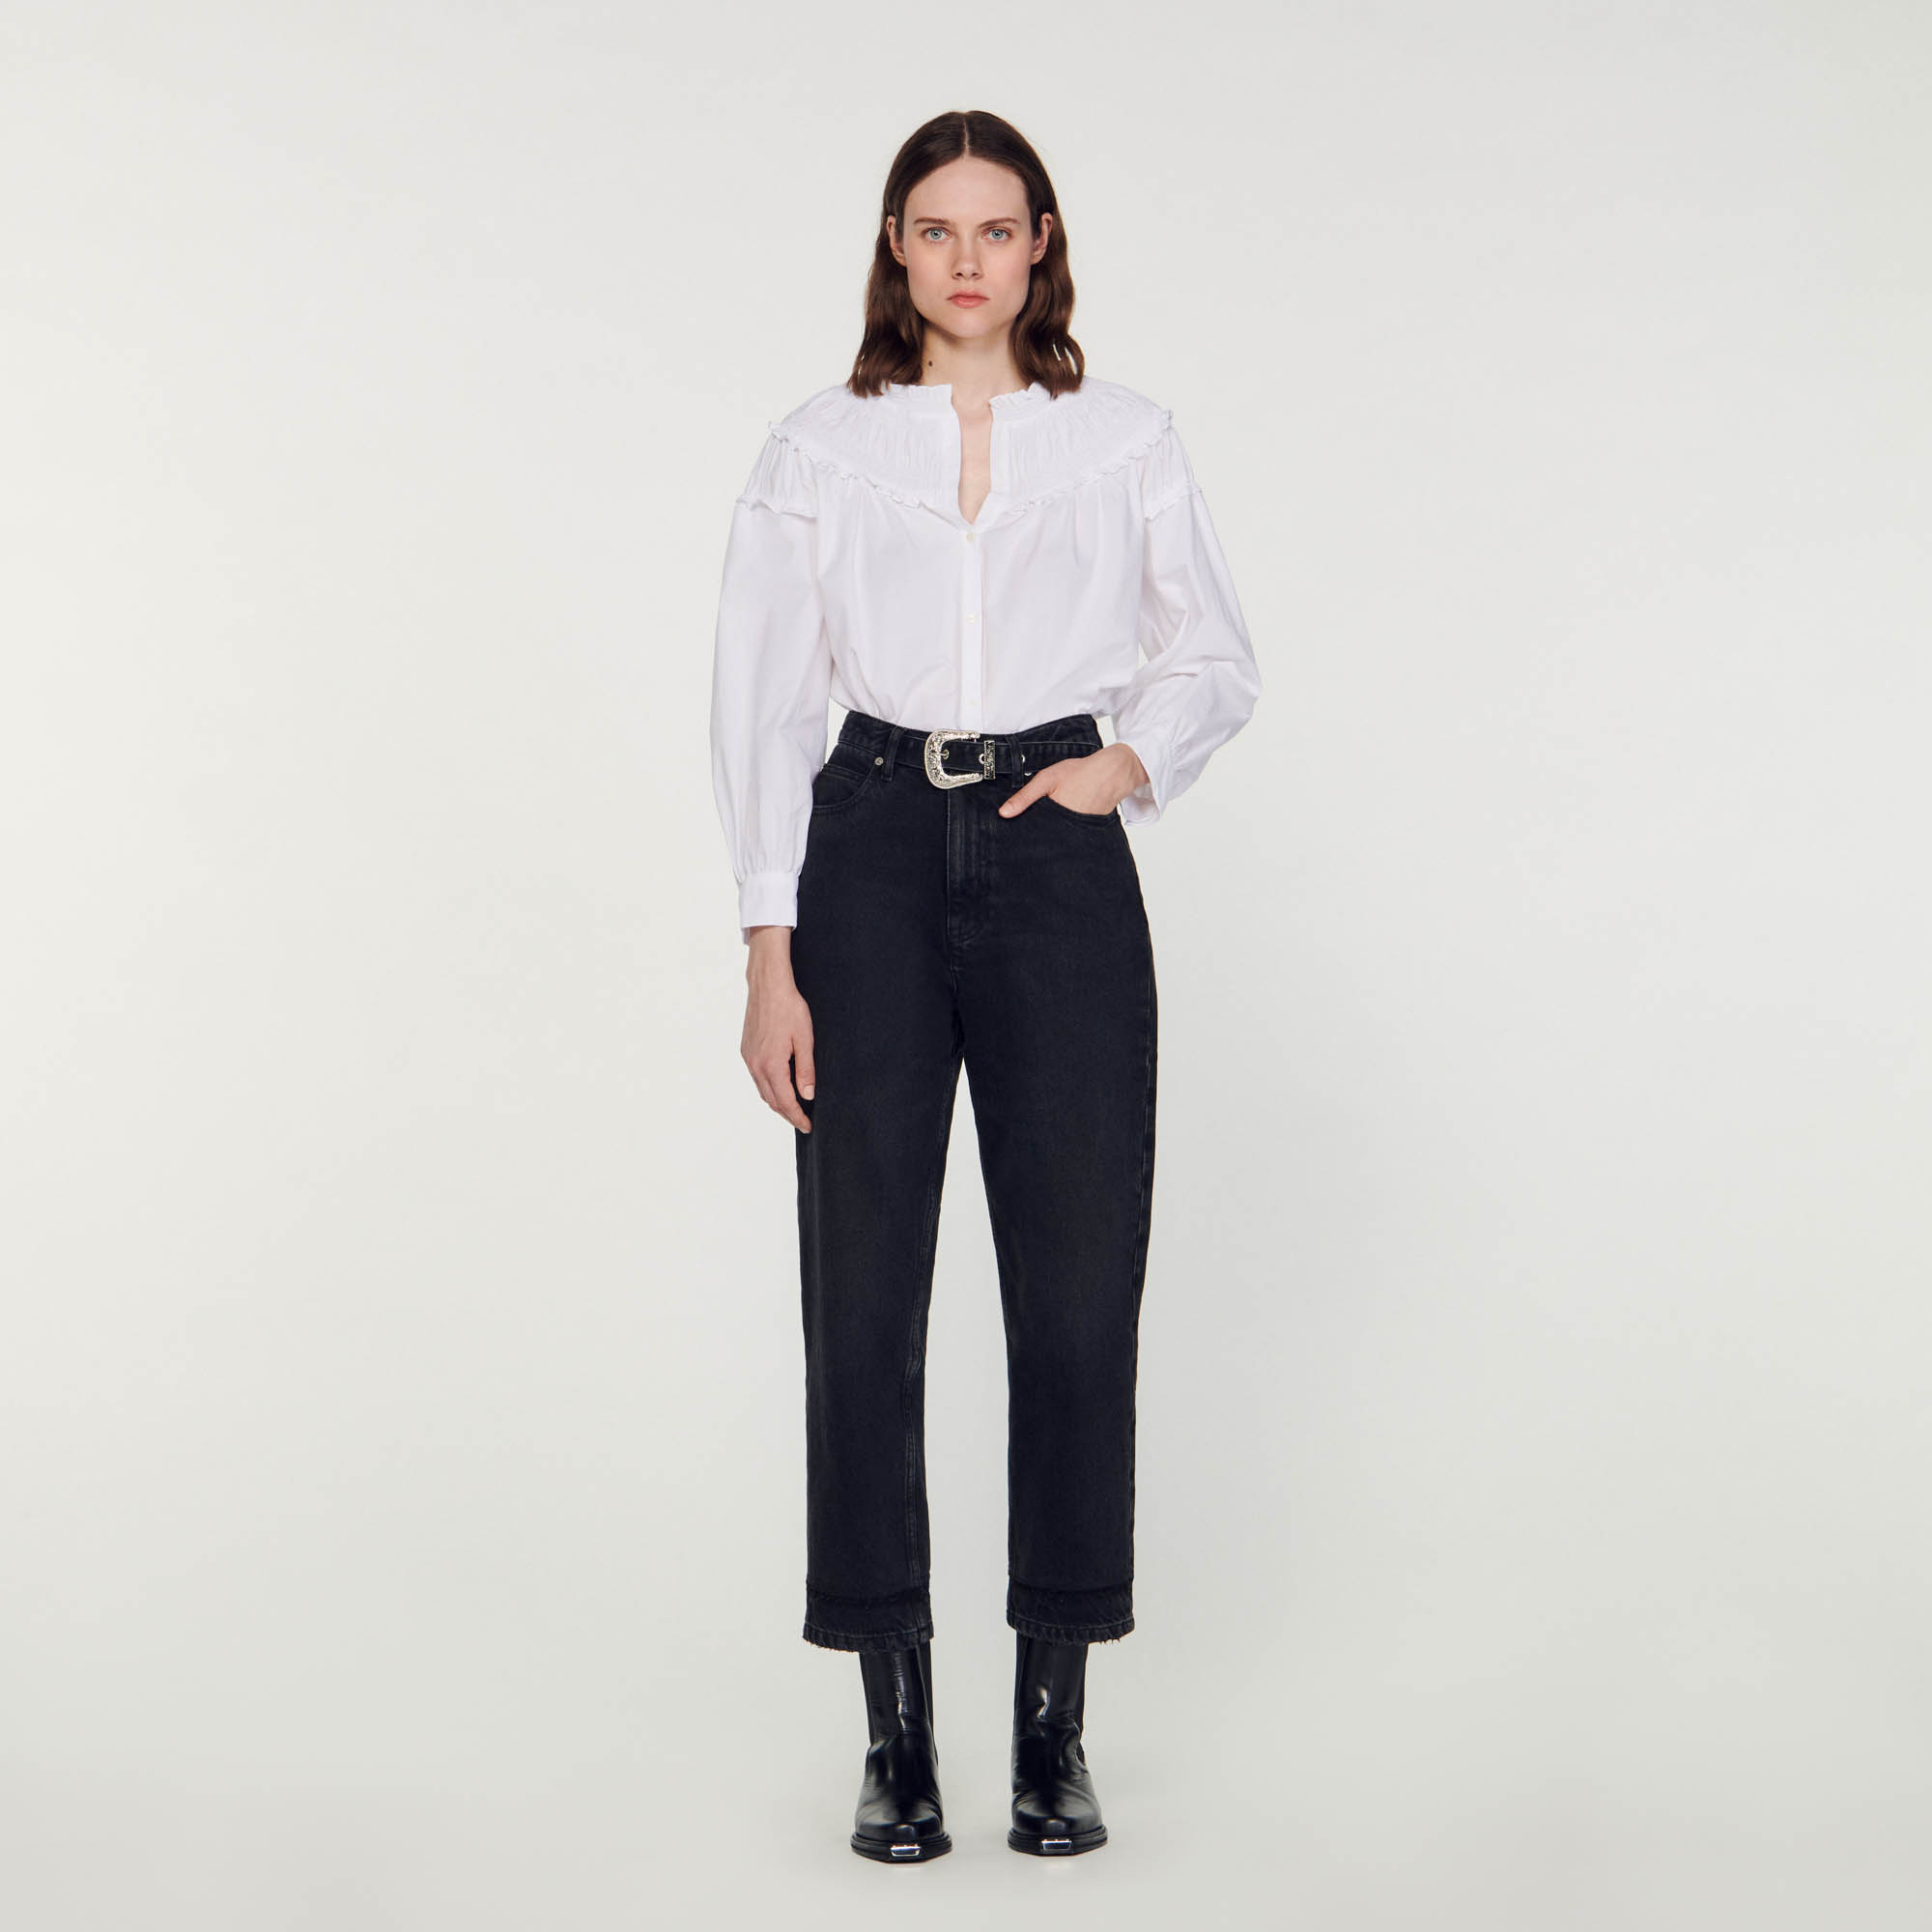 Sandro cotton Buttons: Poplin blouse with a smocked and ruffled collar, long sleeves with buttoned cuffs, and a button fastening